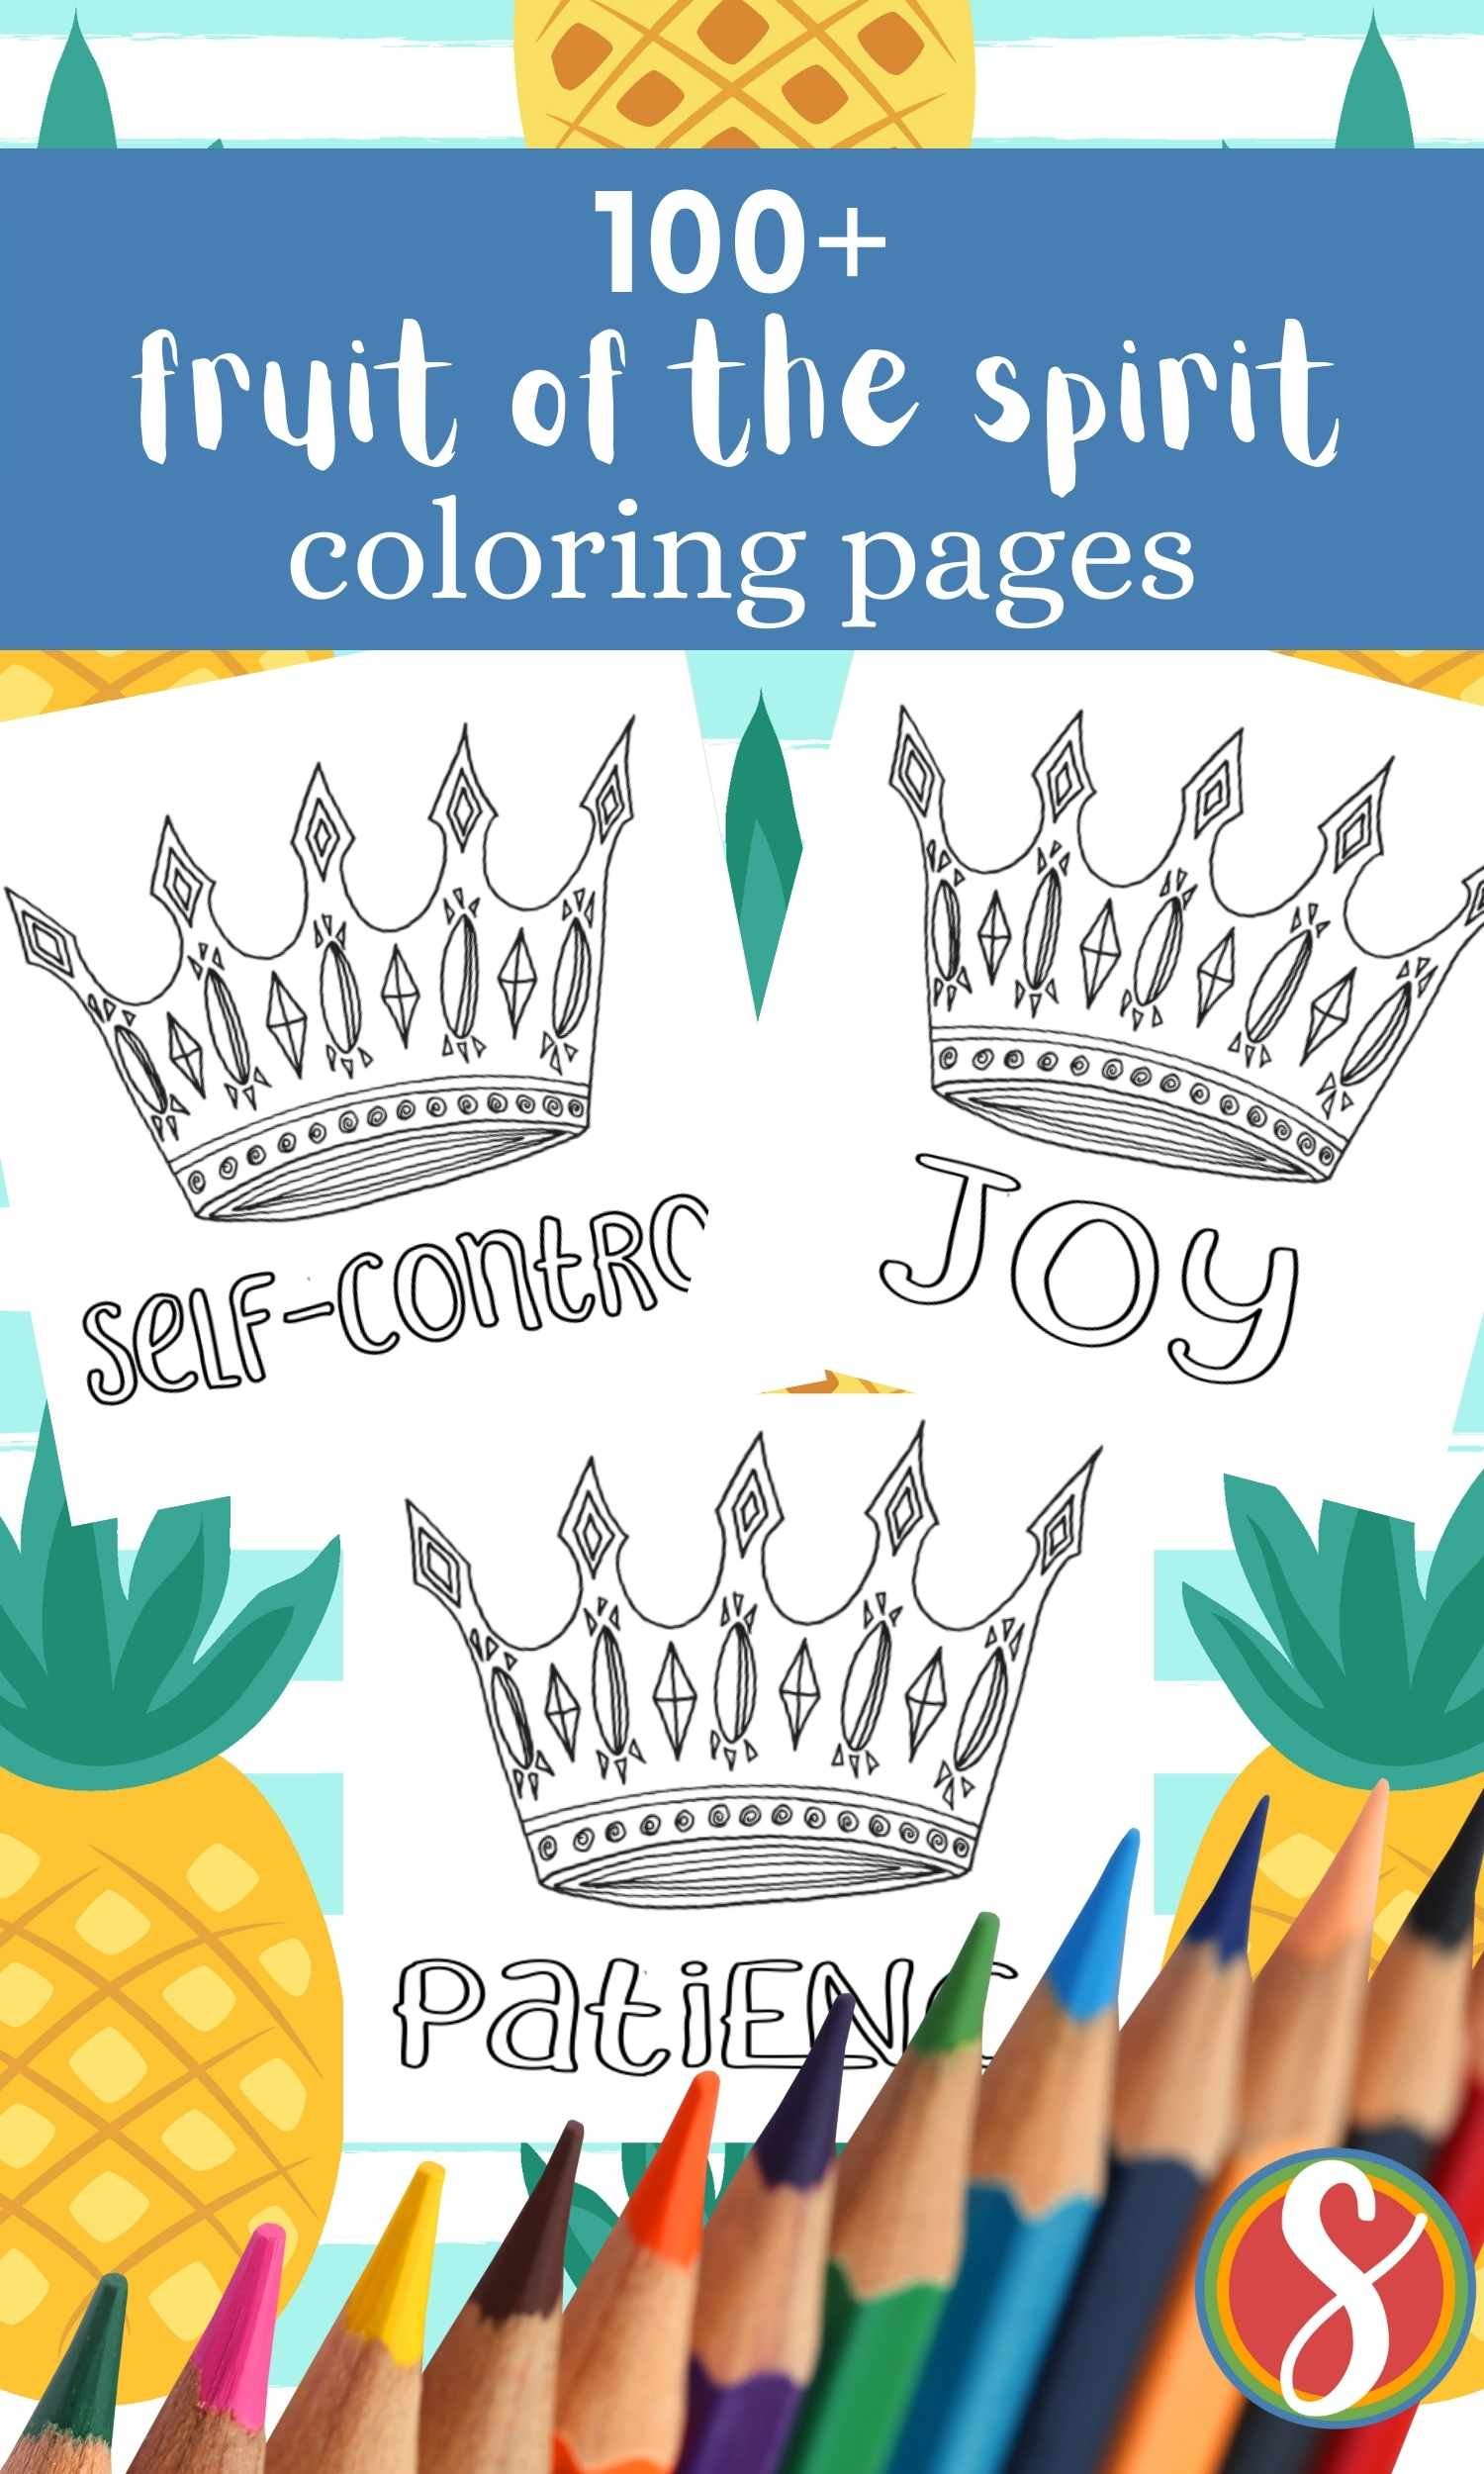 collage of fruit of the spirit color pages with crowns